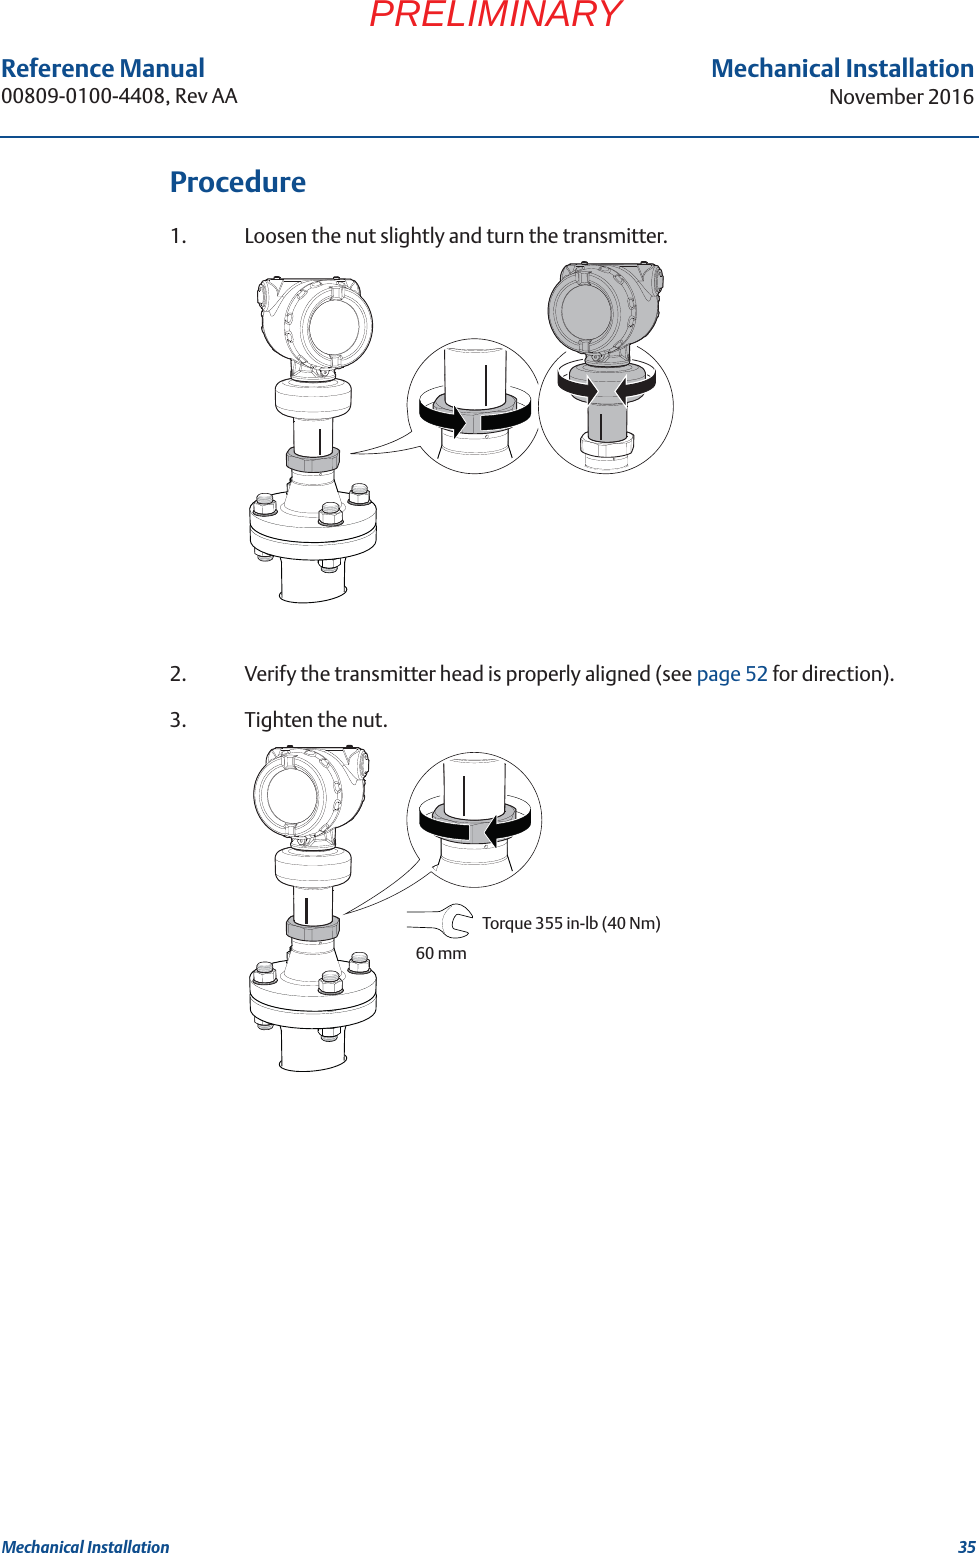 35Reference Manual 00809-0100-4408, Rev AAMechanical InstallationNovember 2016Mechanical InstallationPRELIMINARYProcedure1. Loosen the nut slightly and turn the transmitter.2. Verify the transmitter head is properly aligned (see page 52 for direction).3. Tighten the nut.Torque 355 in-lb (40 Nm) 60 mm